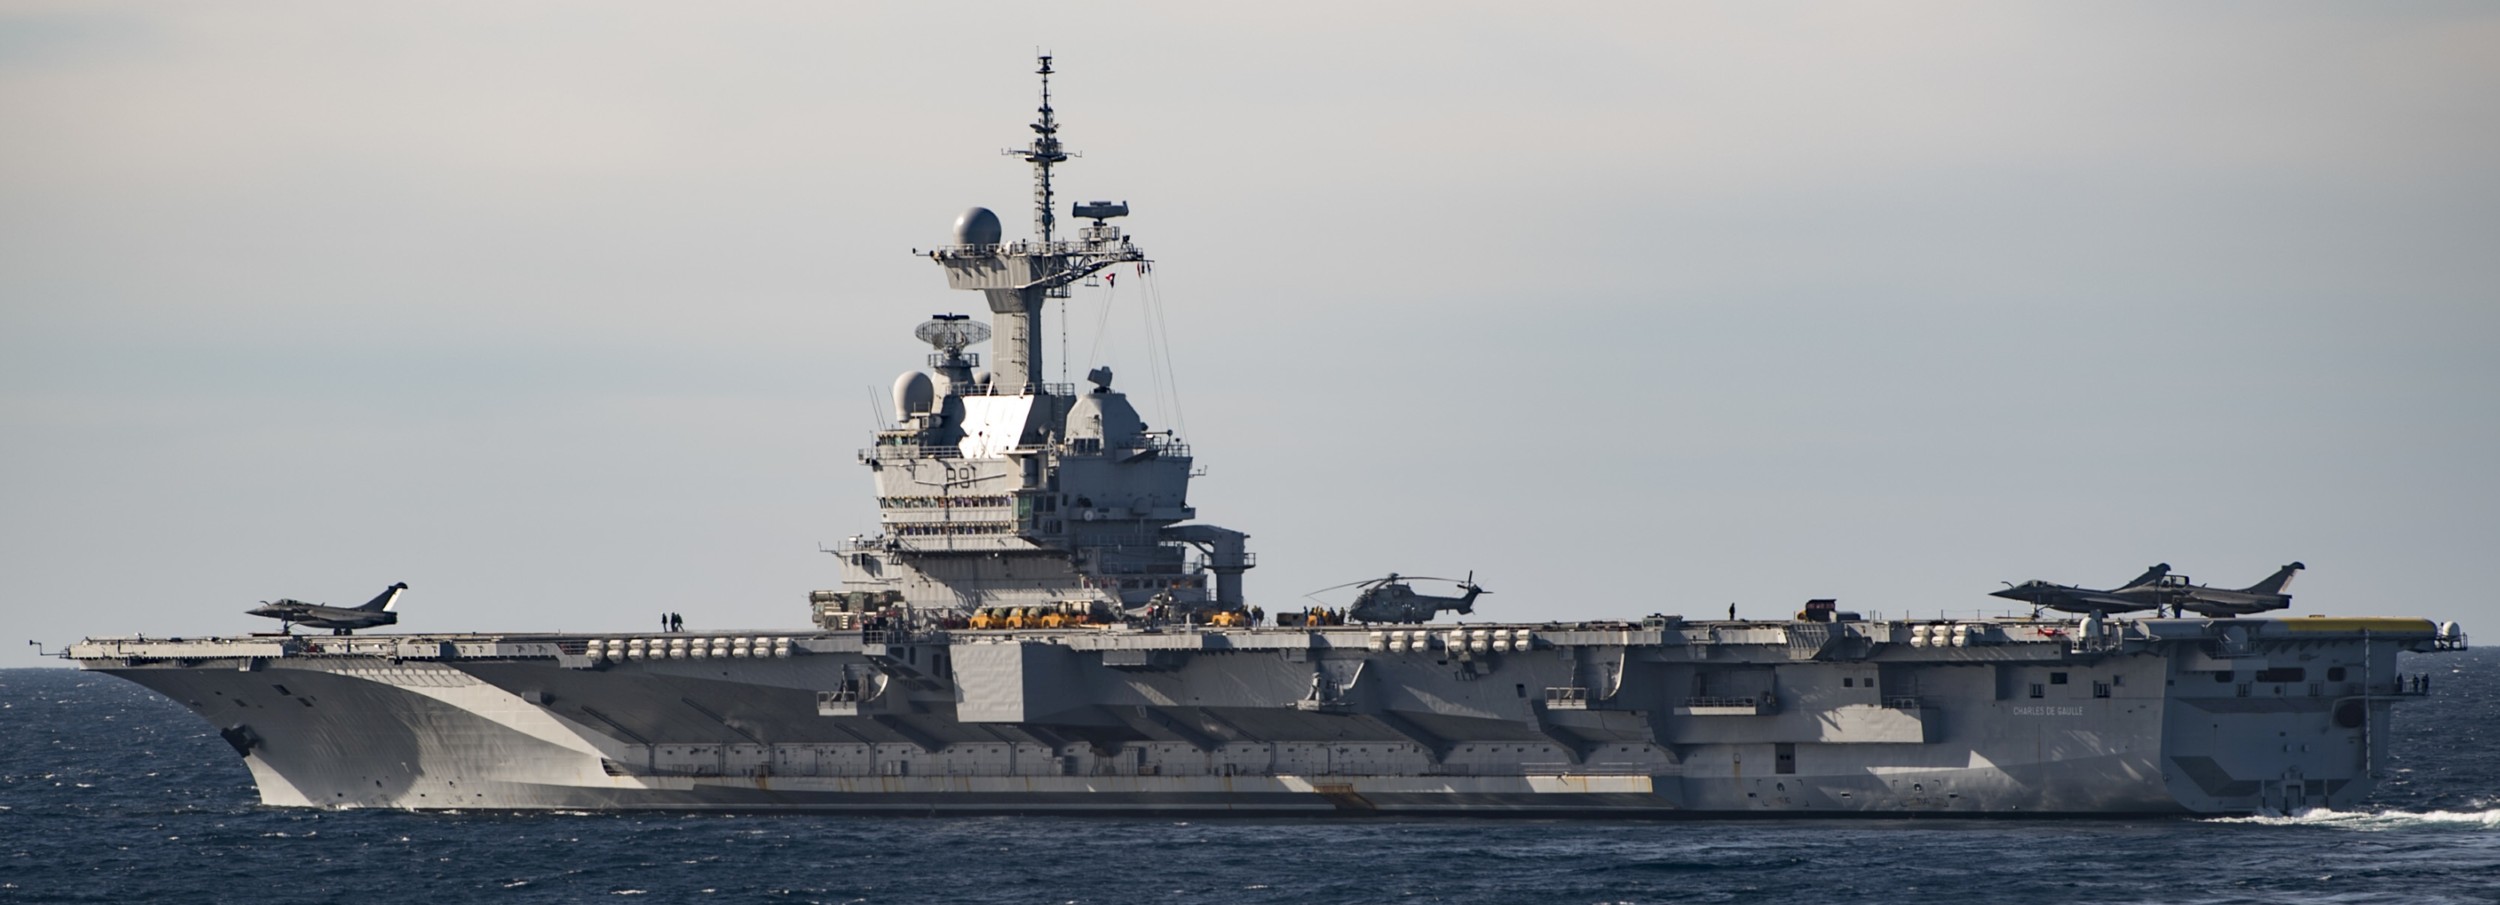 r-91 fs charles de gaulle aircraft carrier french navy marine nationale 61